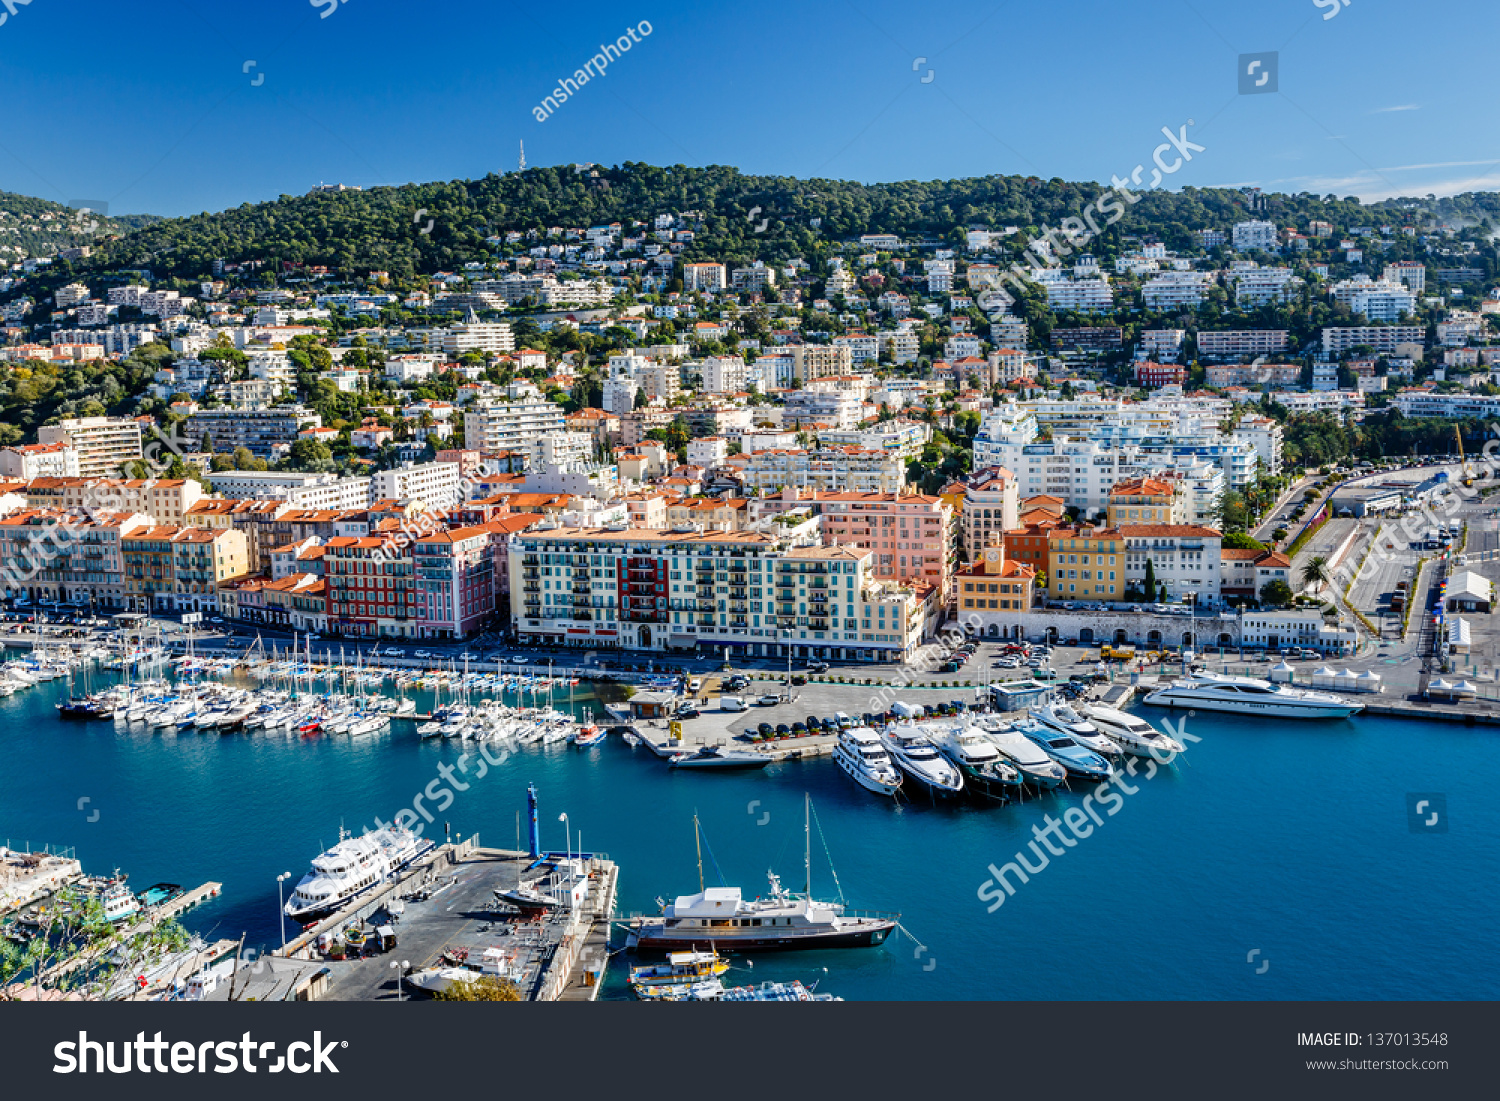 Aerial View On Port Nice Luxury Stock Photo 137013548 - Shutterstock